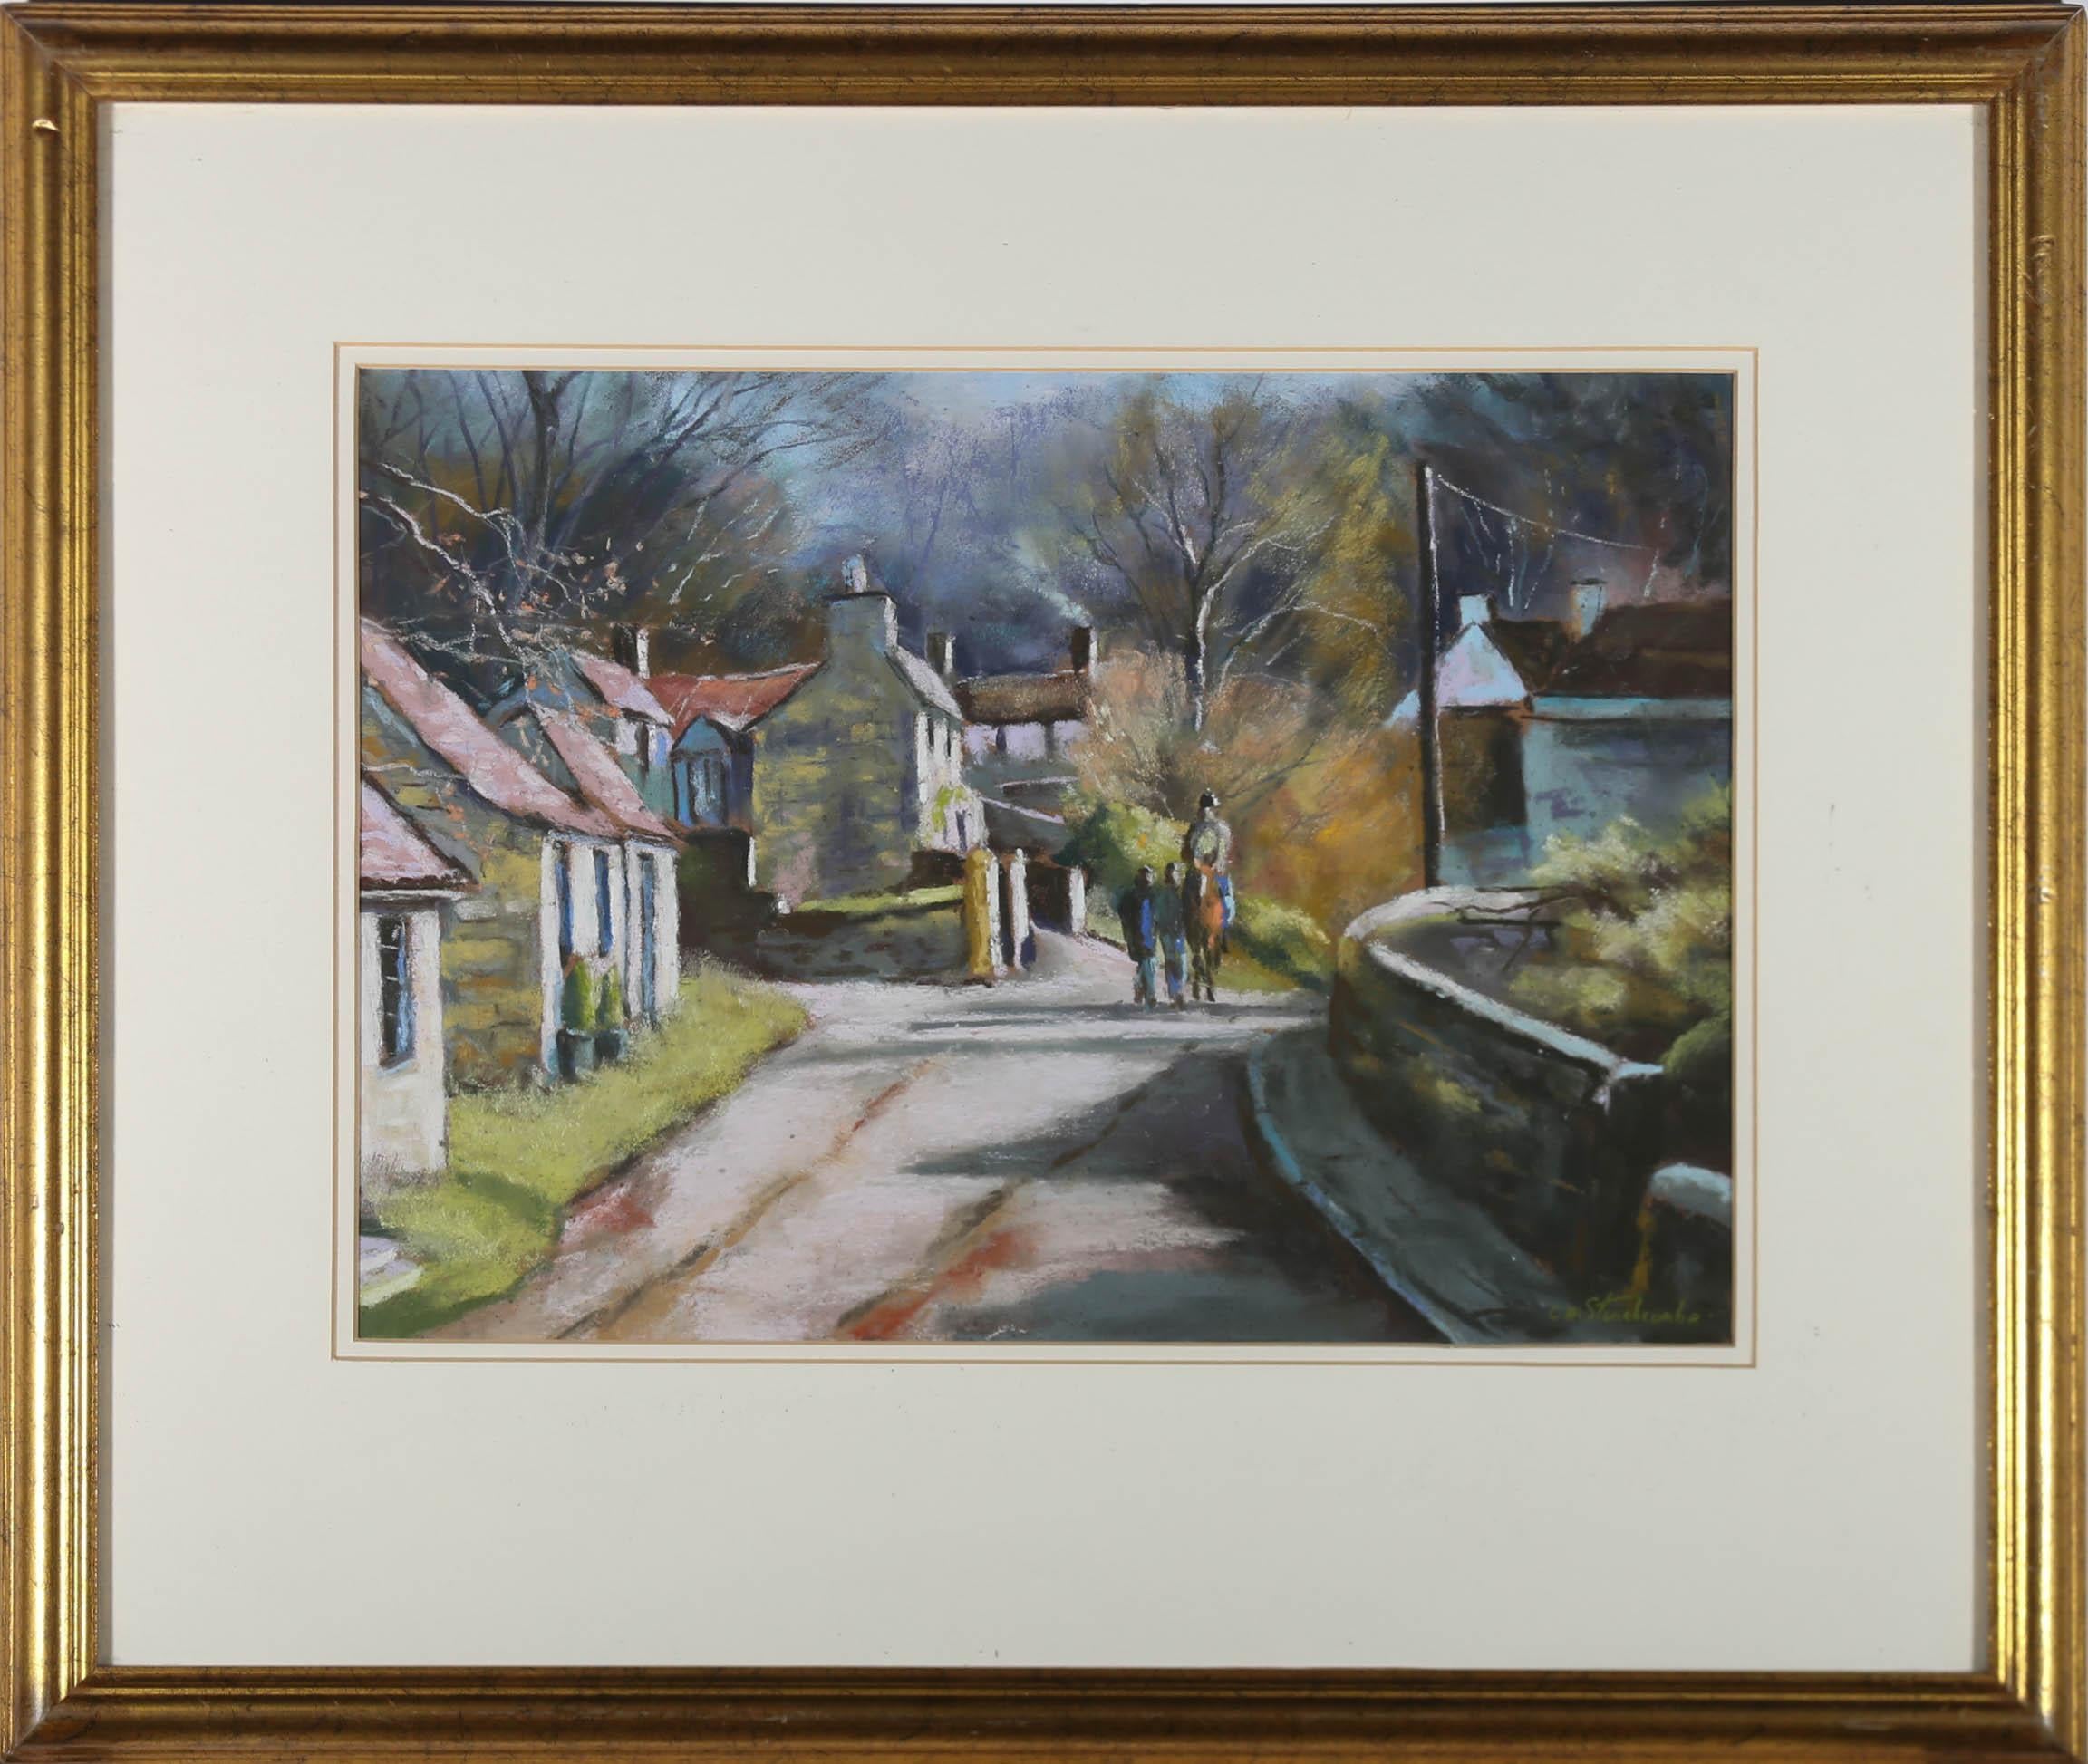 A charming winter scene depicting a the idyllic streets of castle combe. A horse and rider hack down the quiet lane under barren January trees. Signed to the lower right. On paper.
